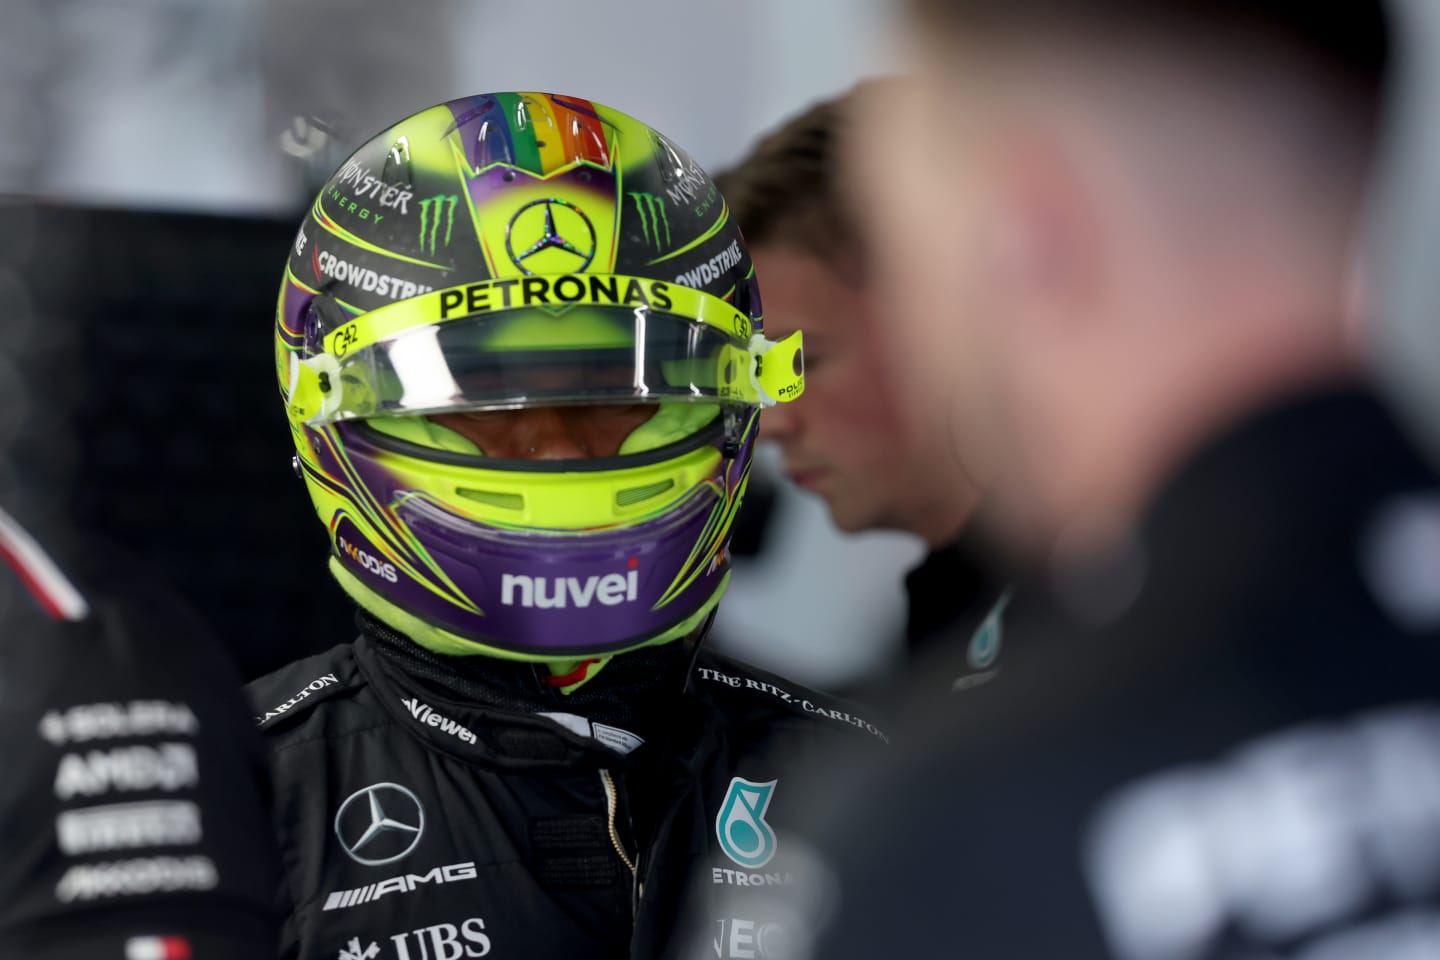 ZANDVOORT, NETHERLANDS - AUGUST 26: Lewis Hamilton of Great Britain and Mercedes prepares to drive